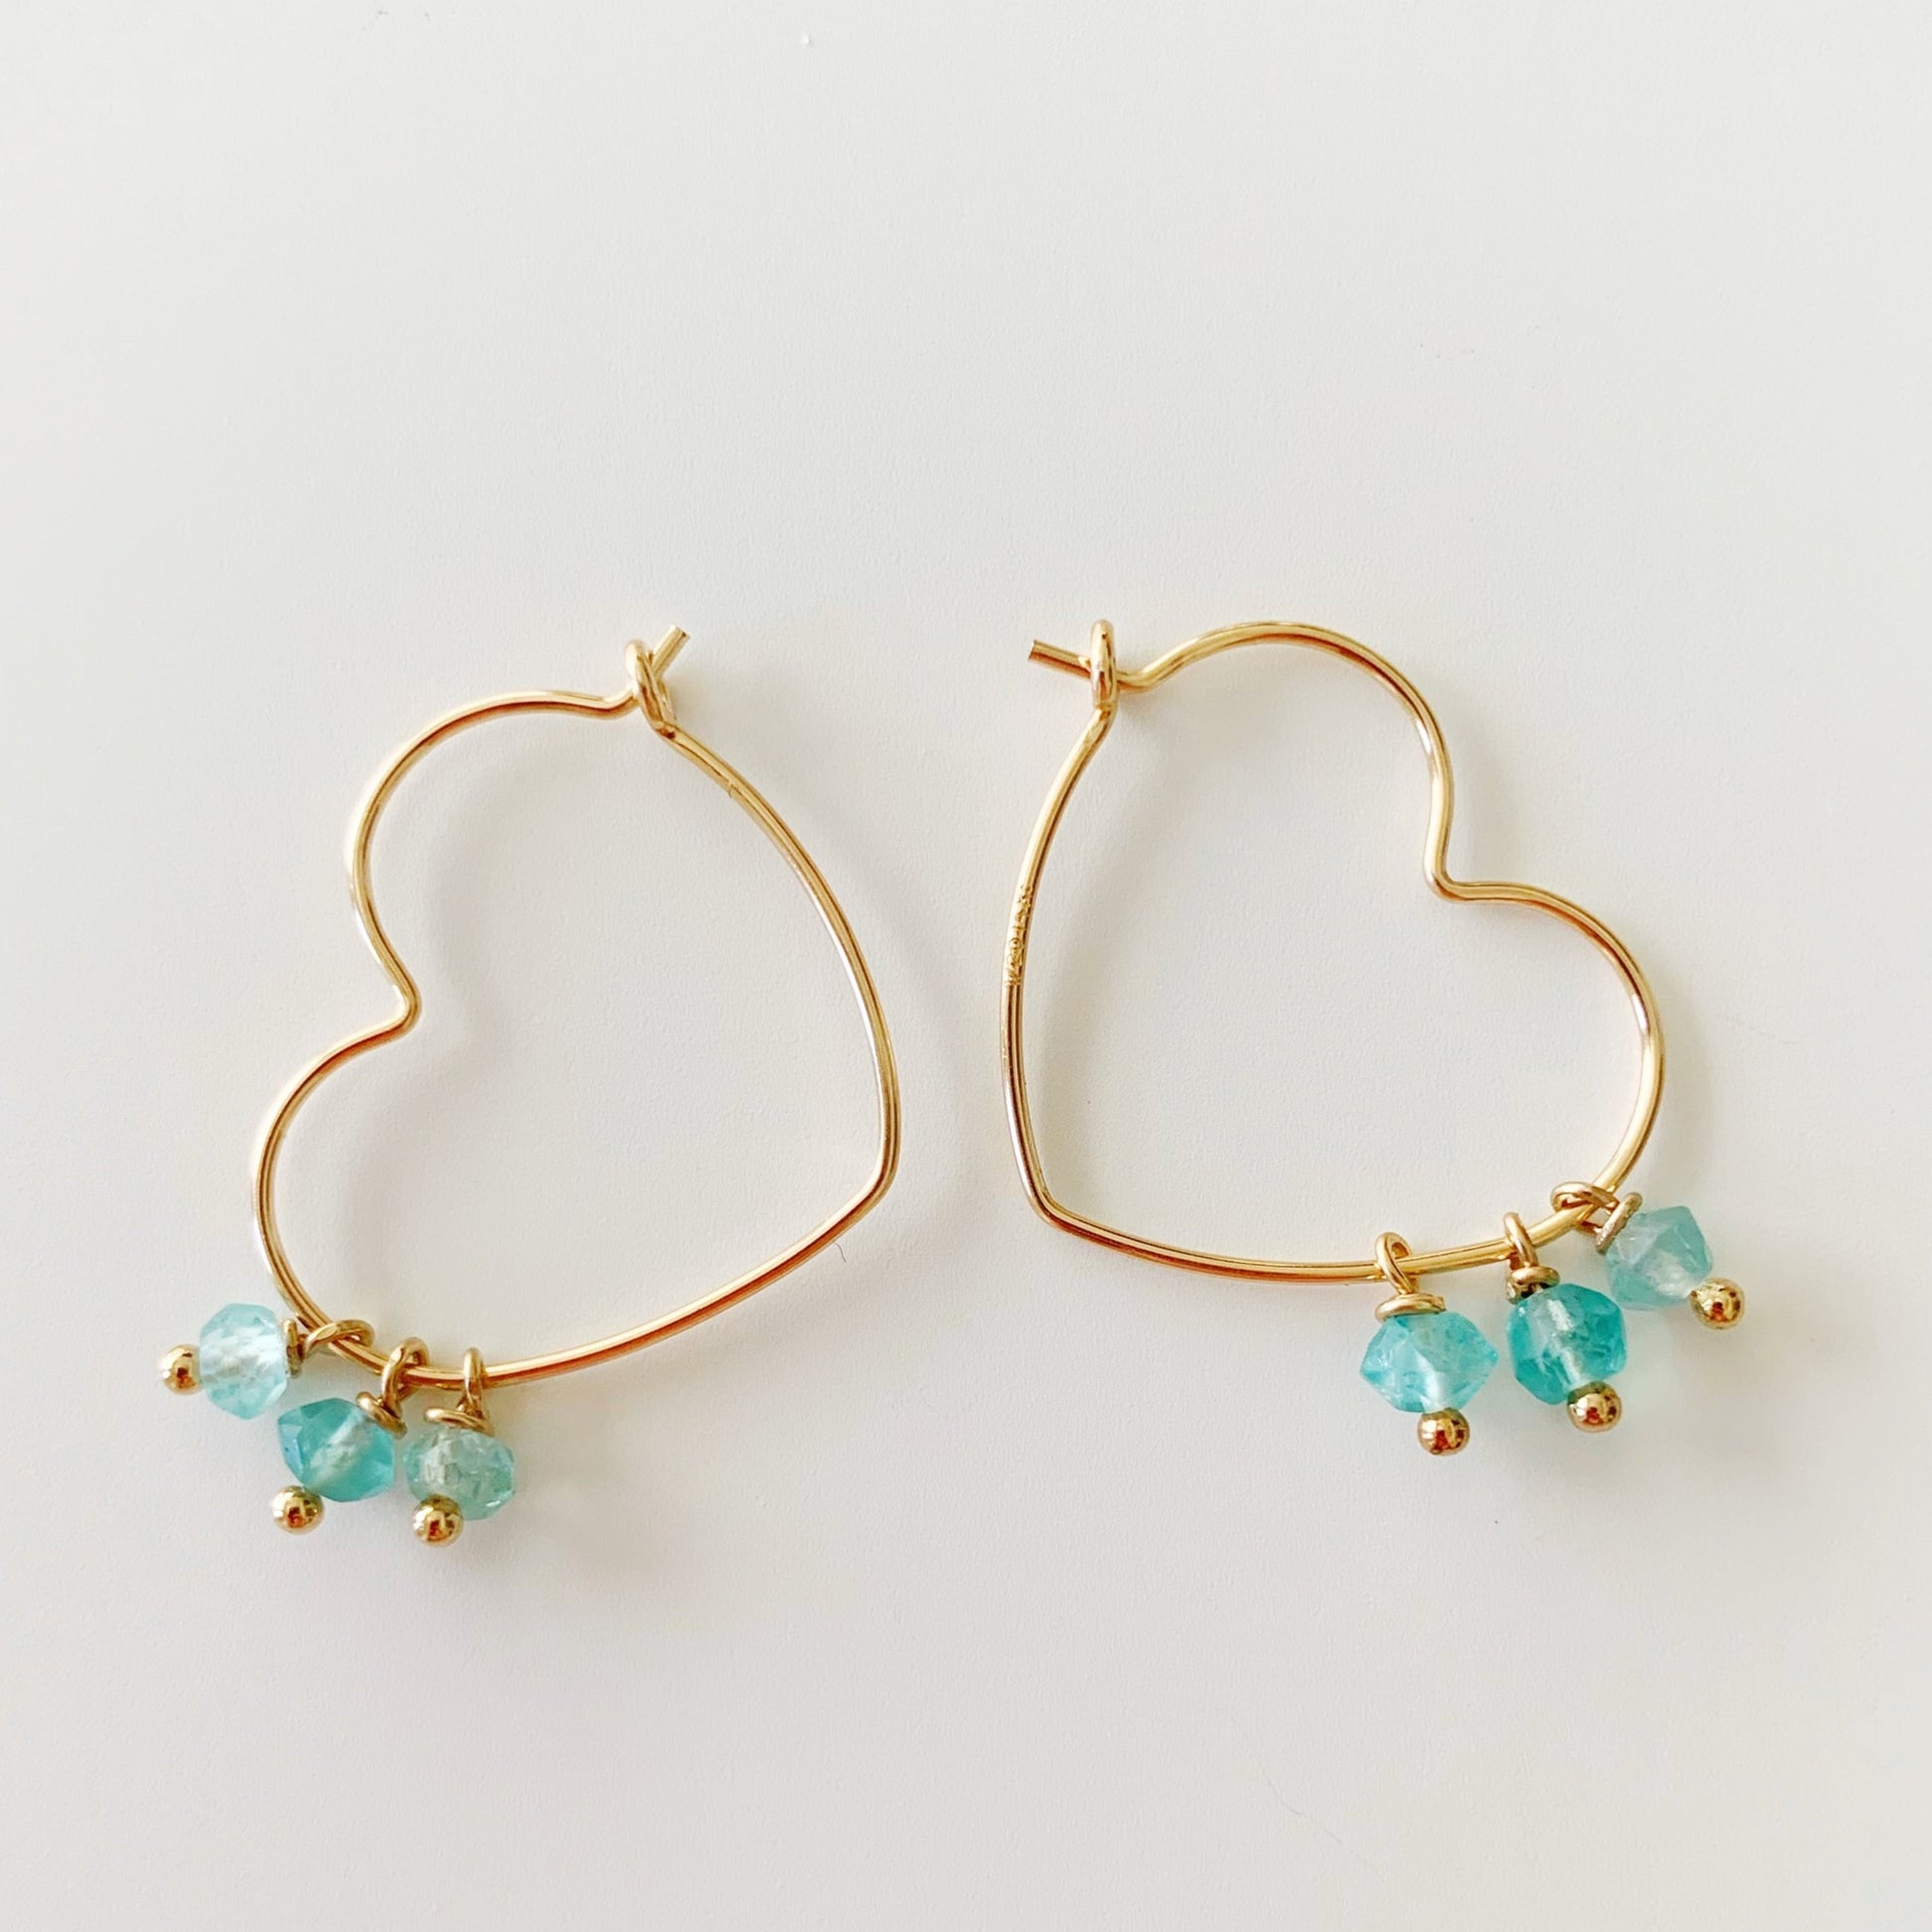 beach lover hoops by mermaids and madeleine are created with 14k gold filled wire and apatie beads. this pair is heart shaped and photographed on a white surface